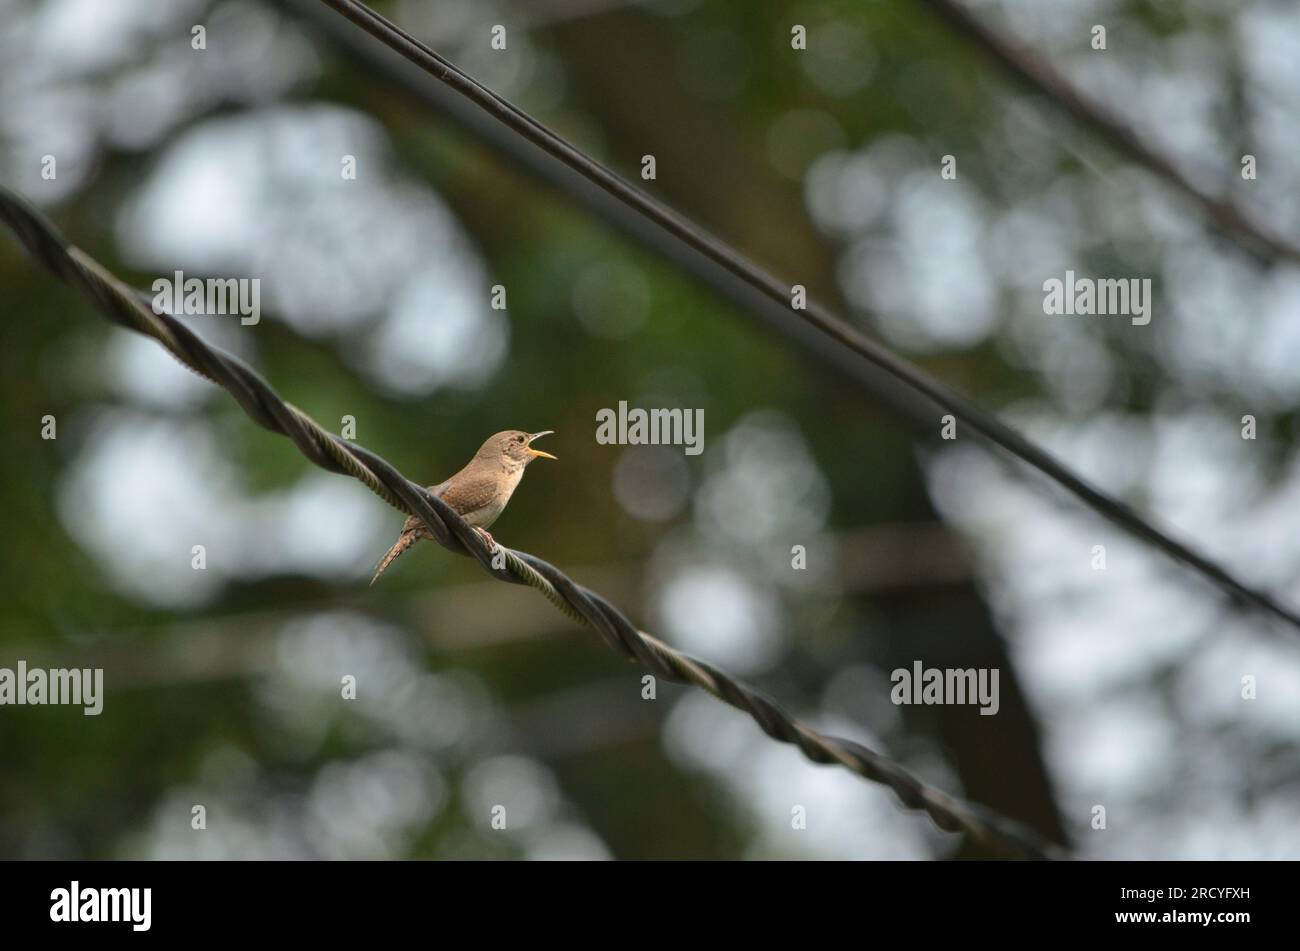 small bird singing on a wire Stock Photo